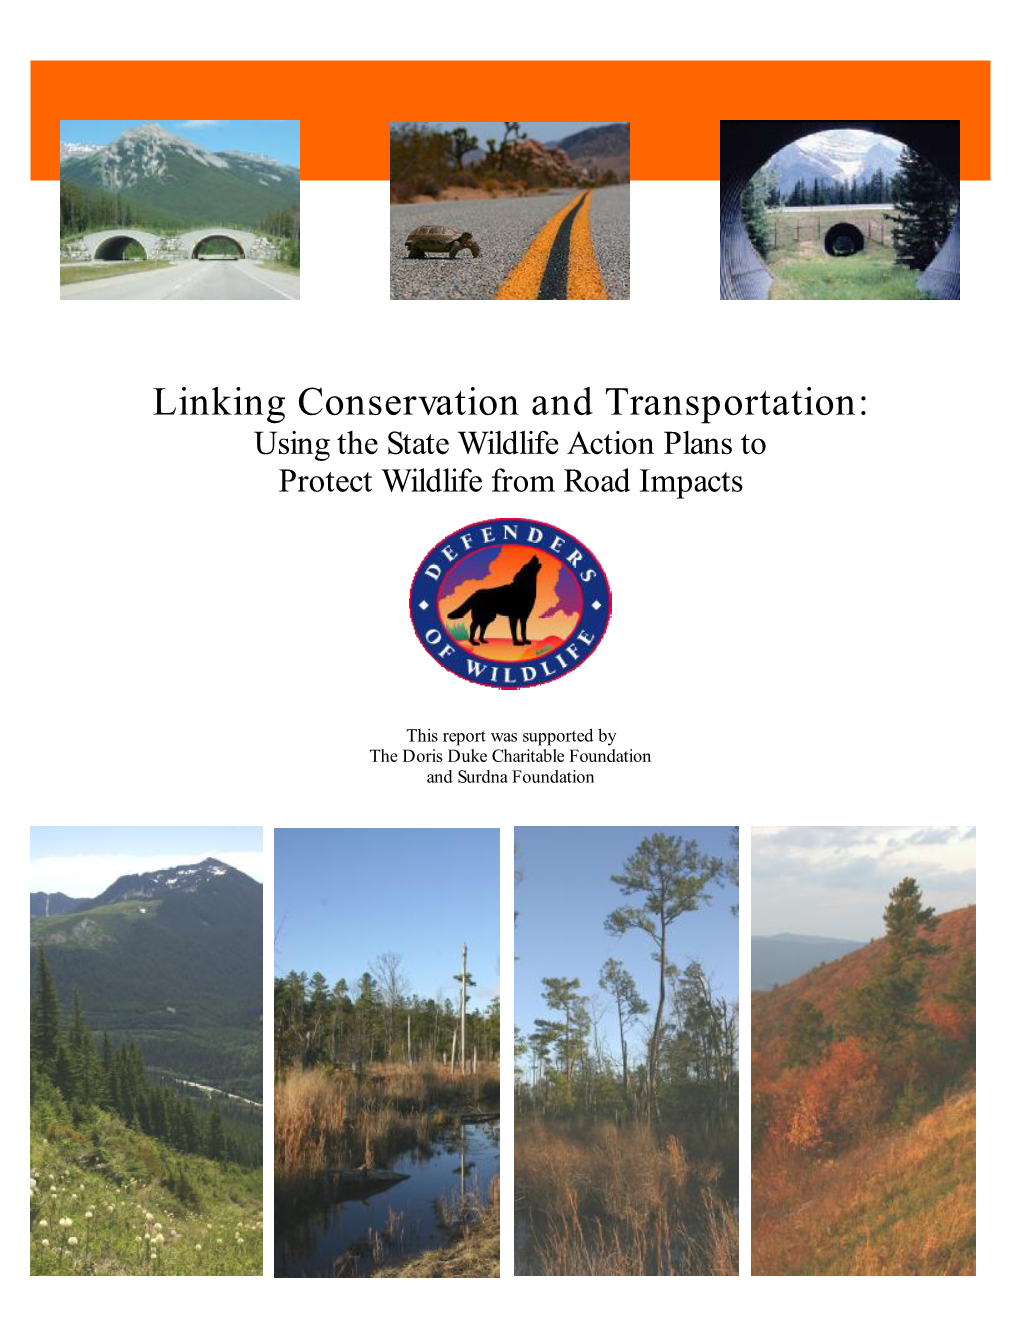 Linking Conservation and Transportation: Using the State Wildlife Action Plans to Protect Wildlife from Road Impacts